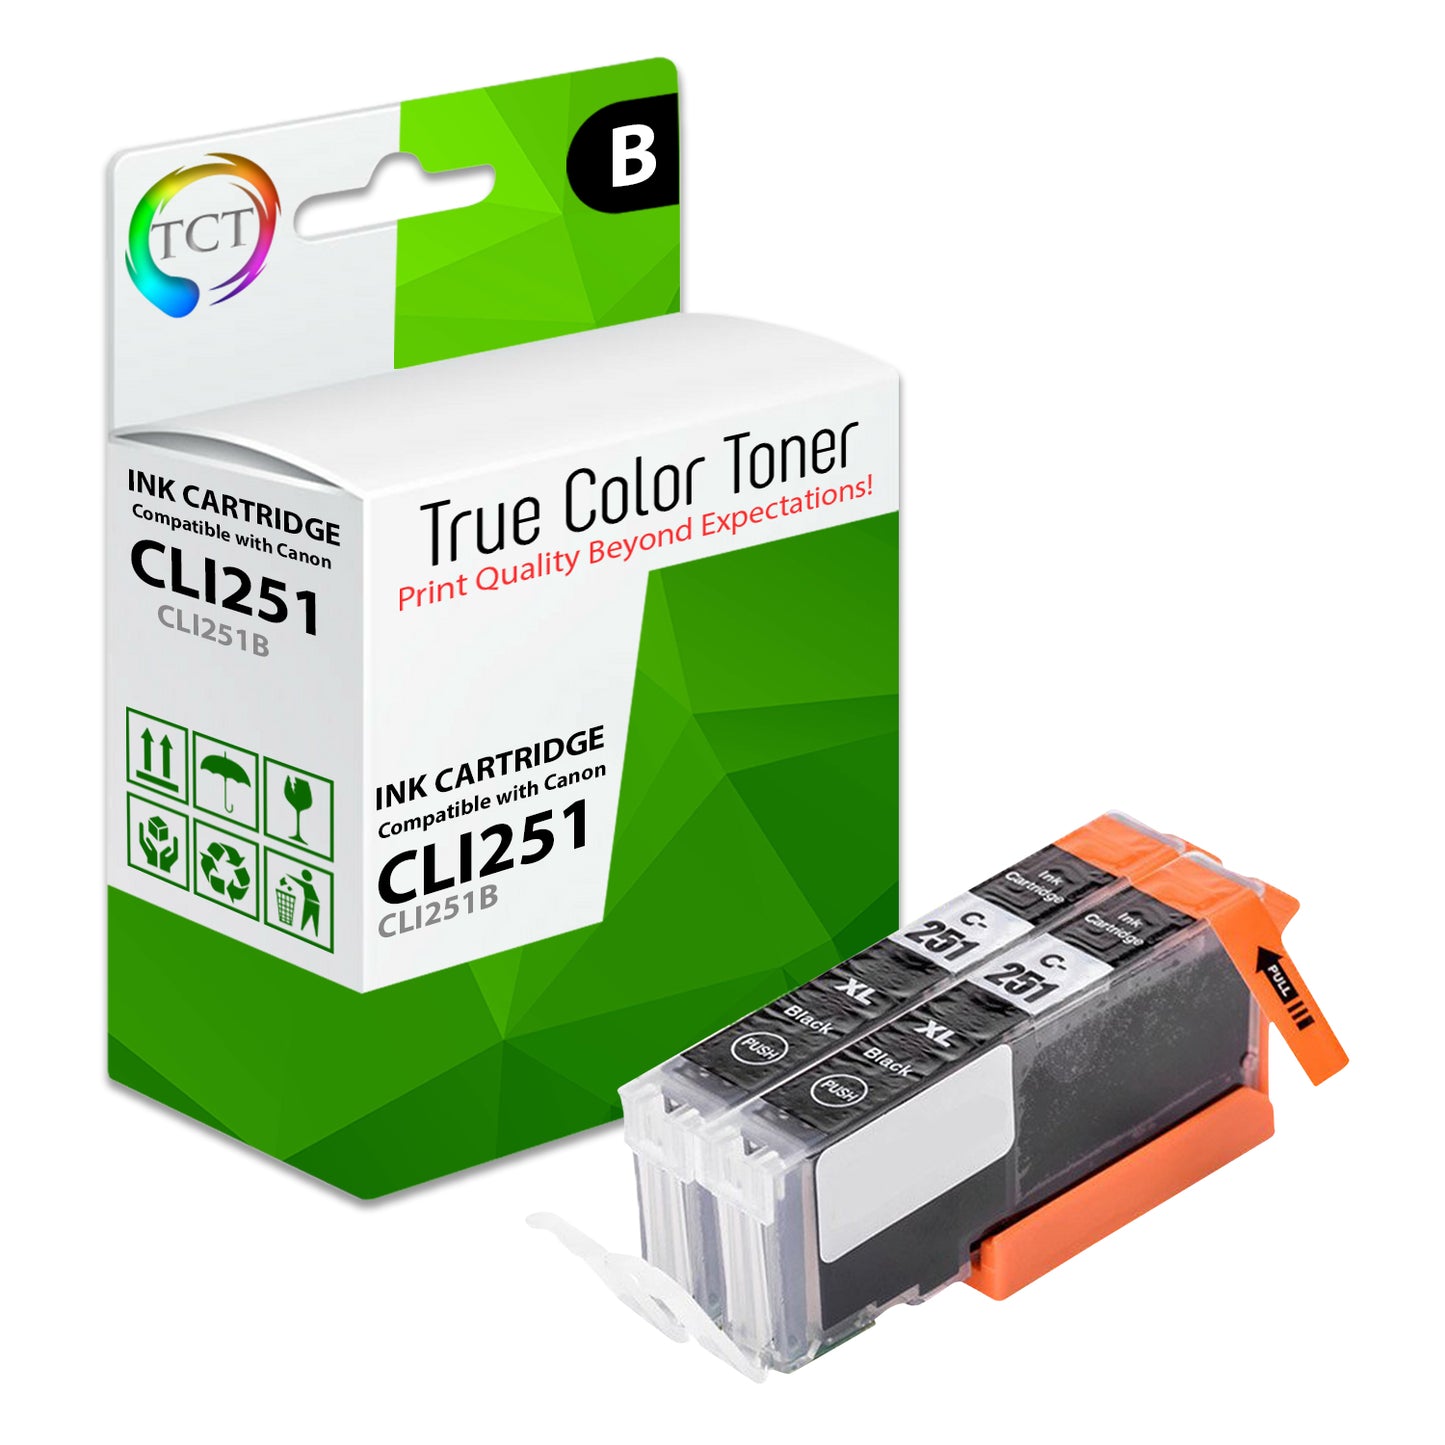 TCT Compatible Ink Cartridge Replacement for the Canon CLI-251 Series - 2 Pack Black